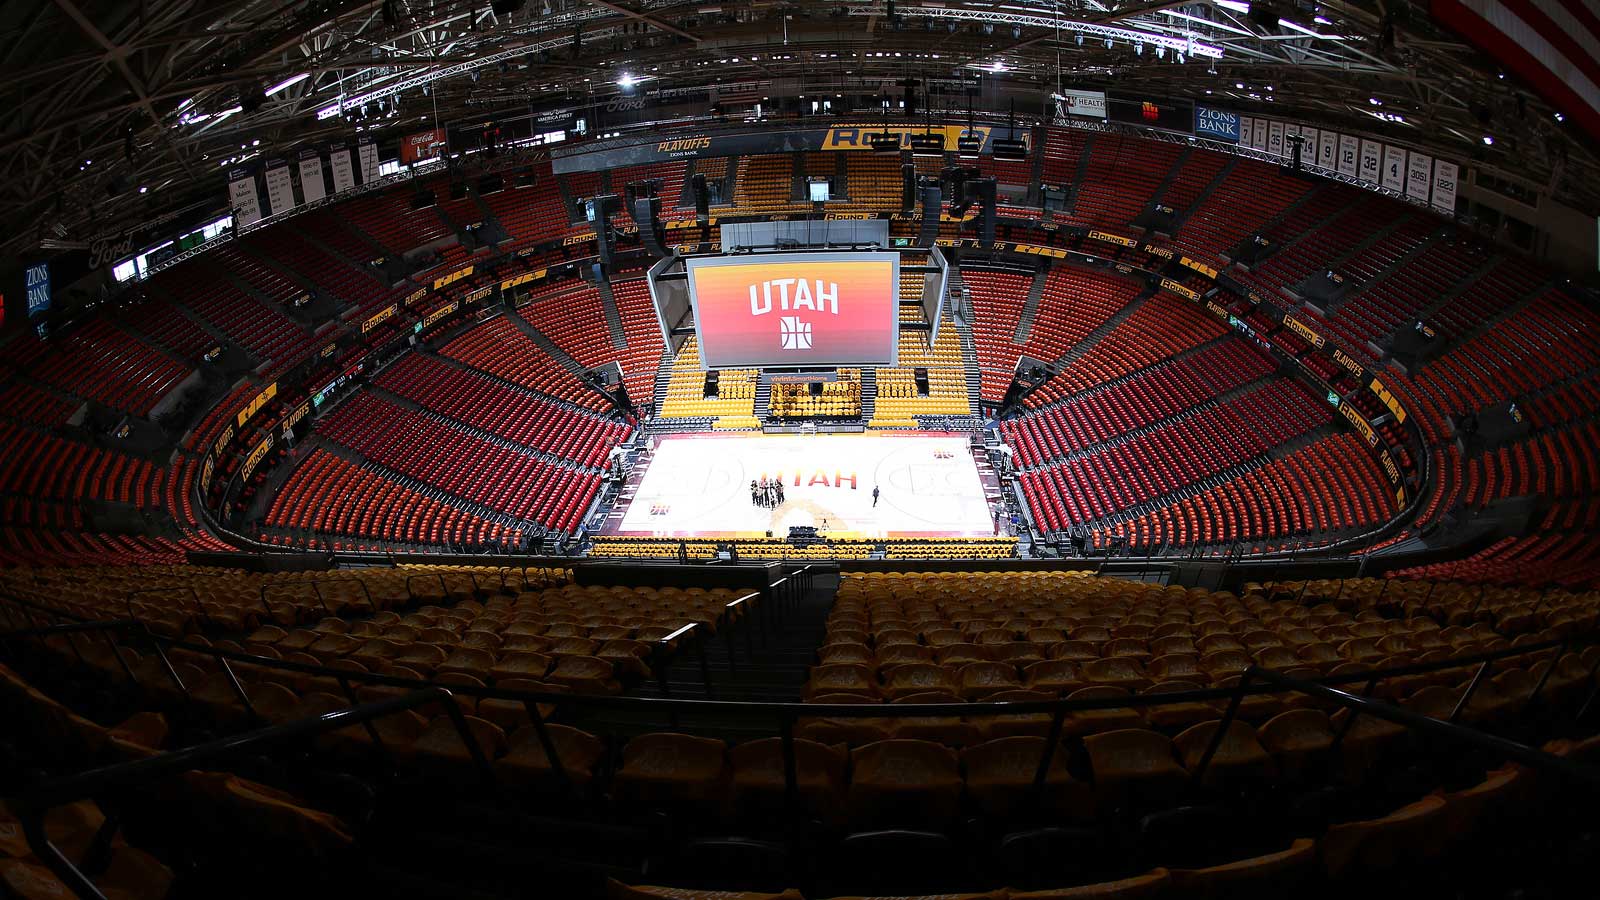 Vivint Arena all dressed up in 'City' colors for Utah Jazz playoff opener